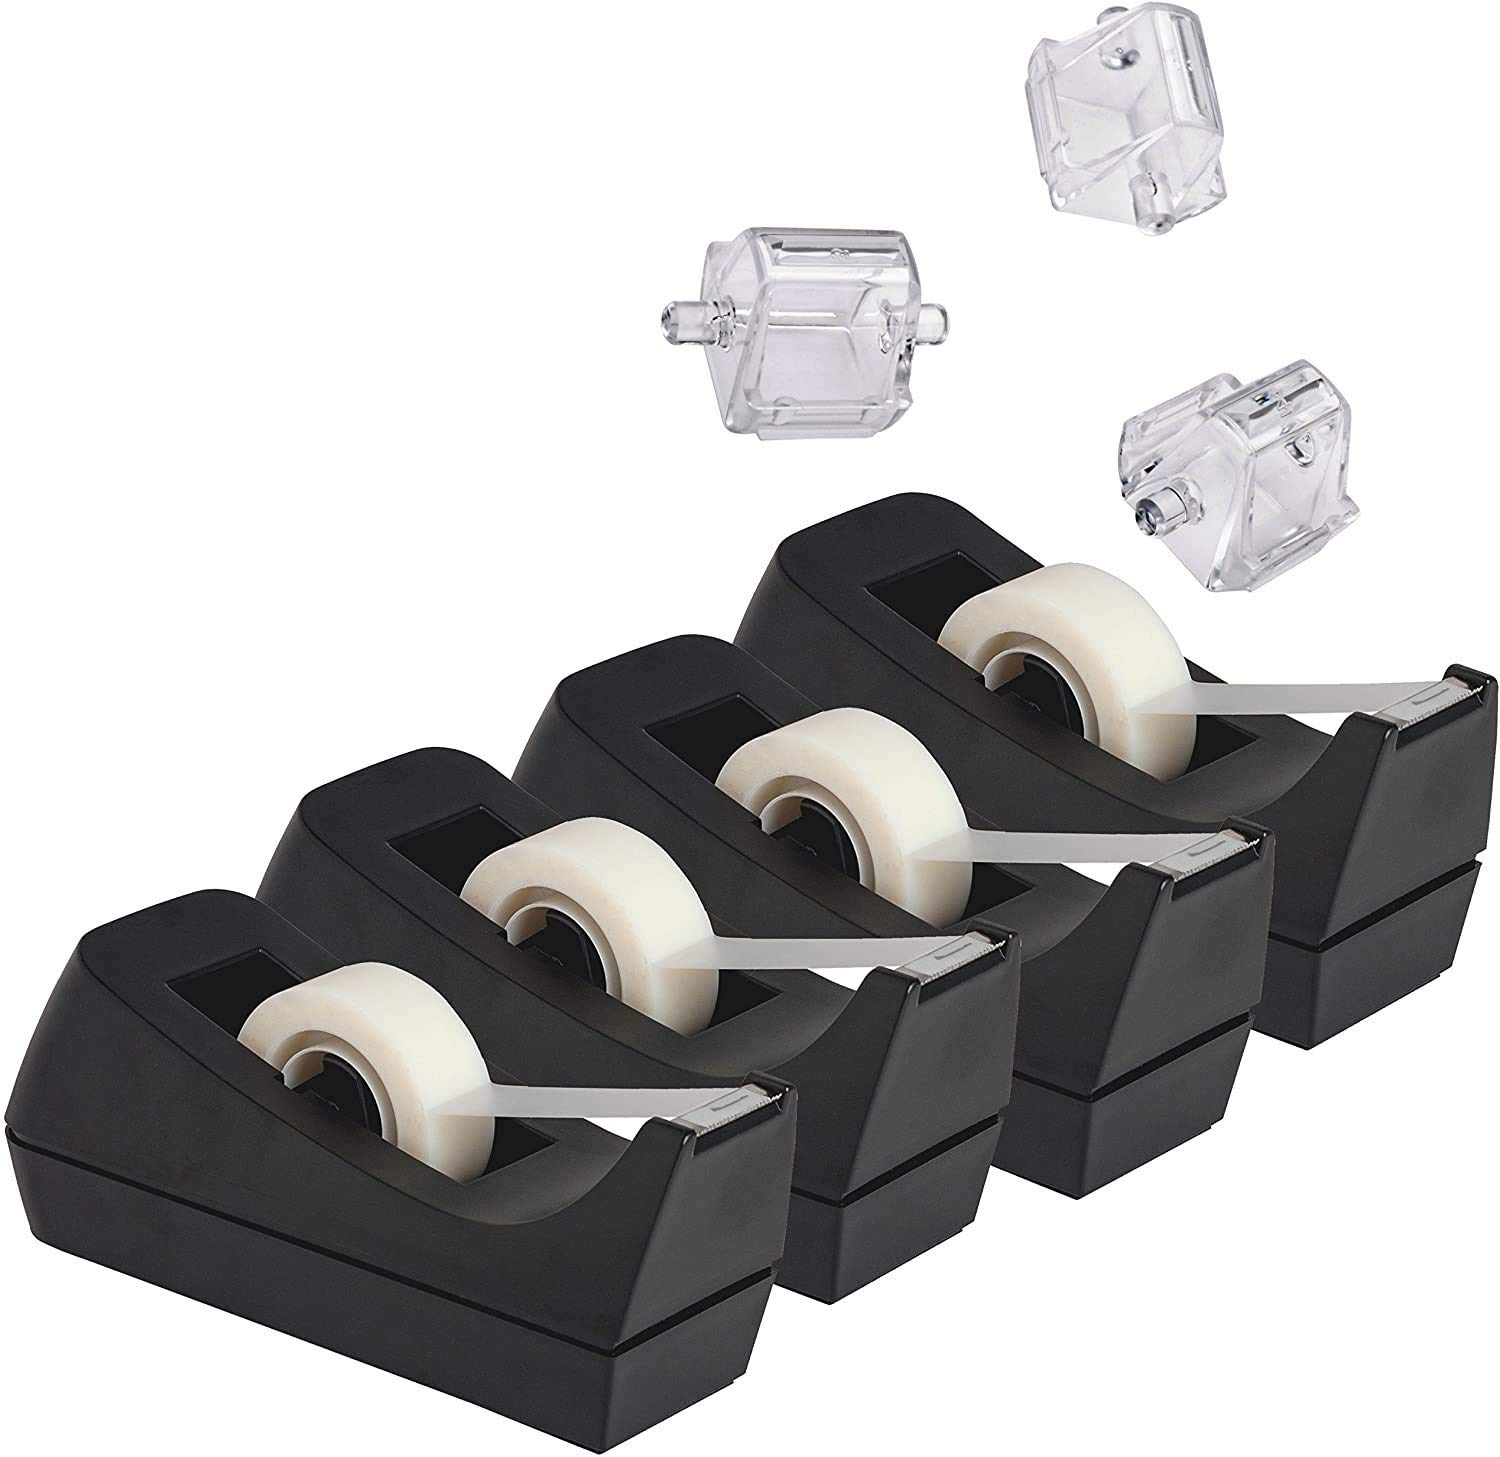 Book Cover Desktop Tape Dispenser, 4-Pack, Non-Skid Base - with 3 Extra Tape Dispenser Replacement Core (Tape not Included), Perfect for Office, Home, School - Value Pack